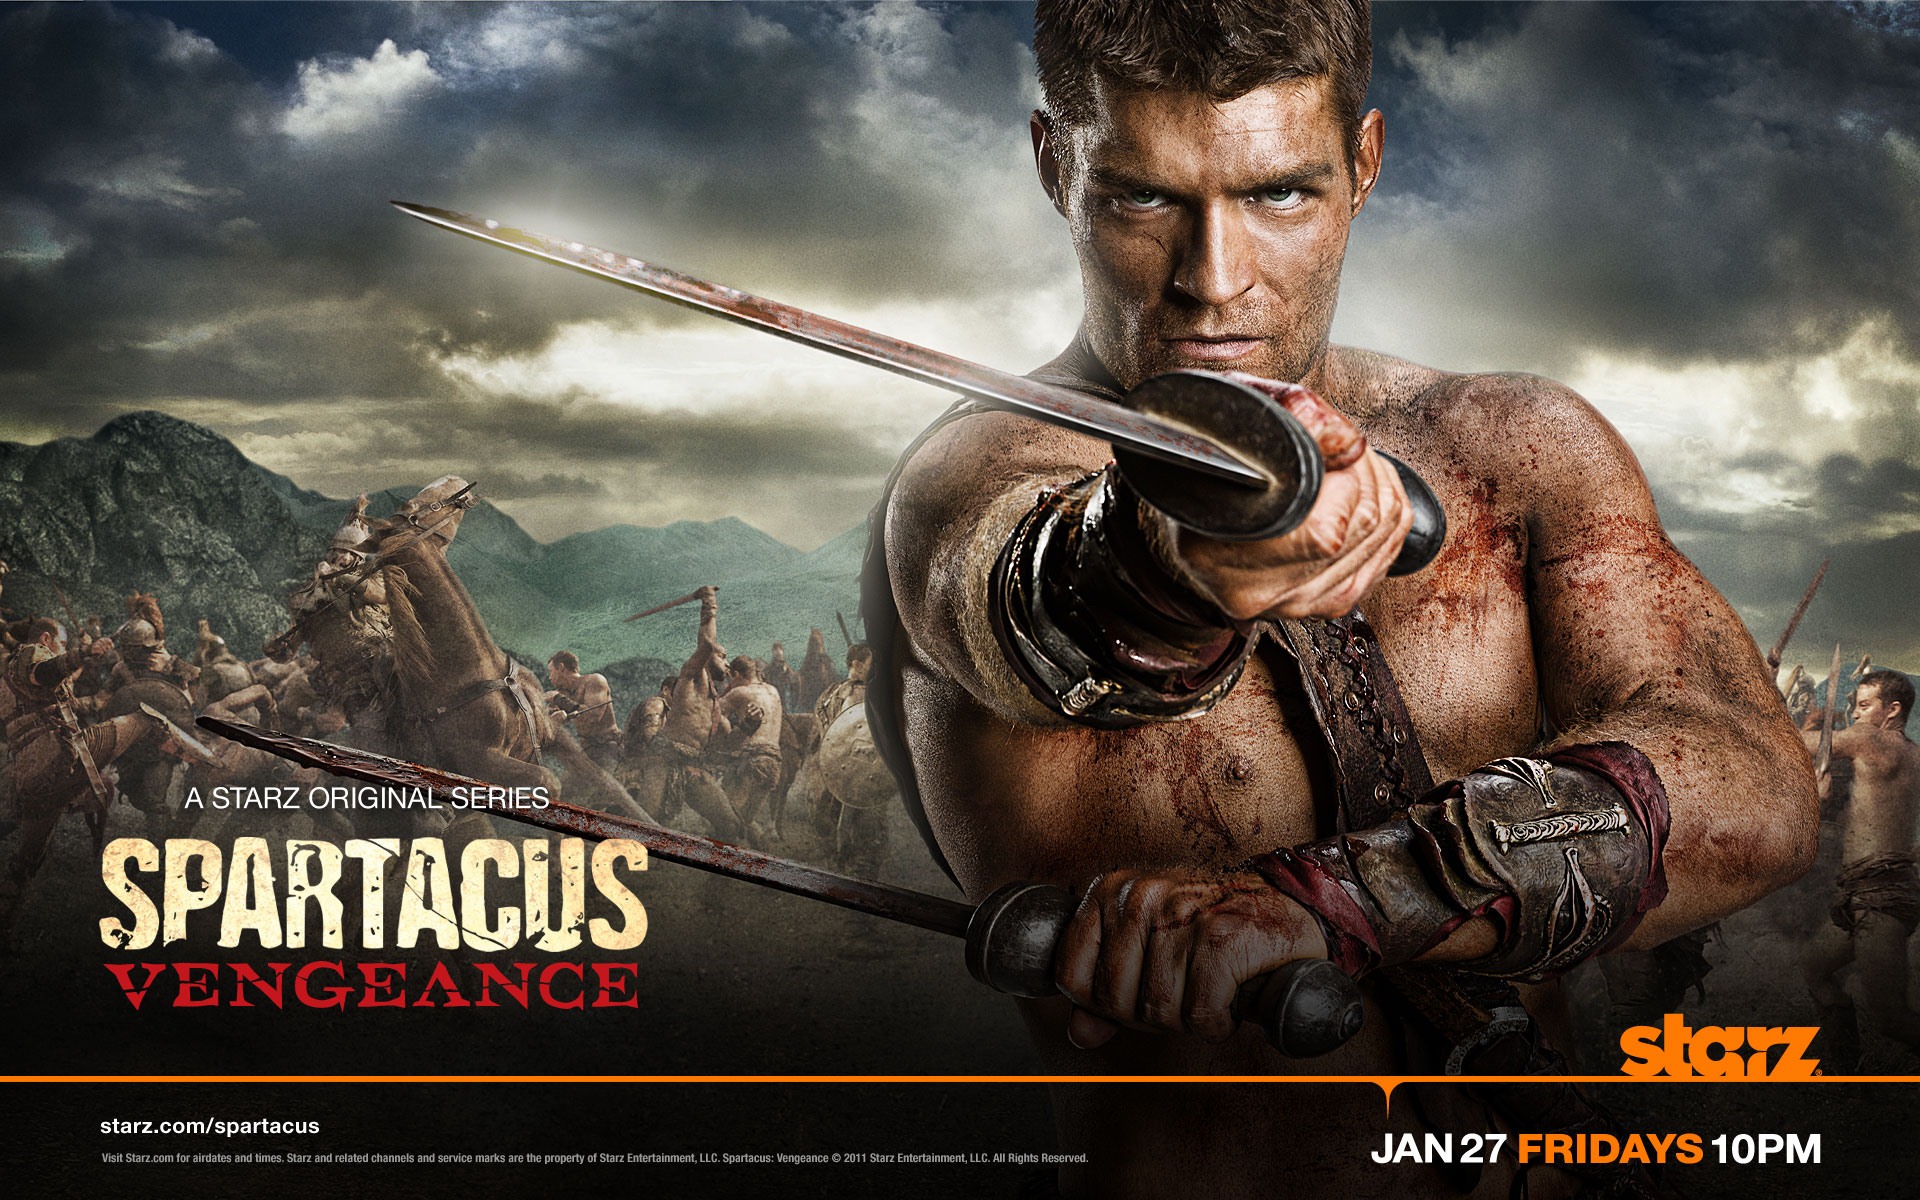 Spartacus: Vengeance HD wallpapers #1 - 1920x1200